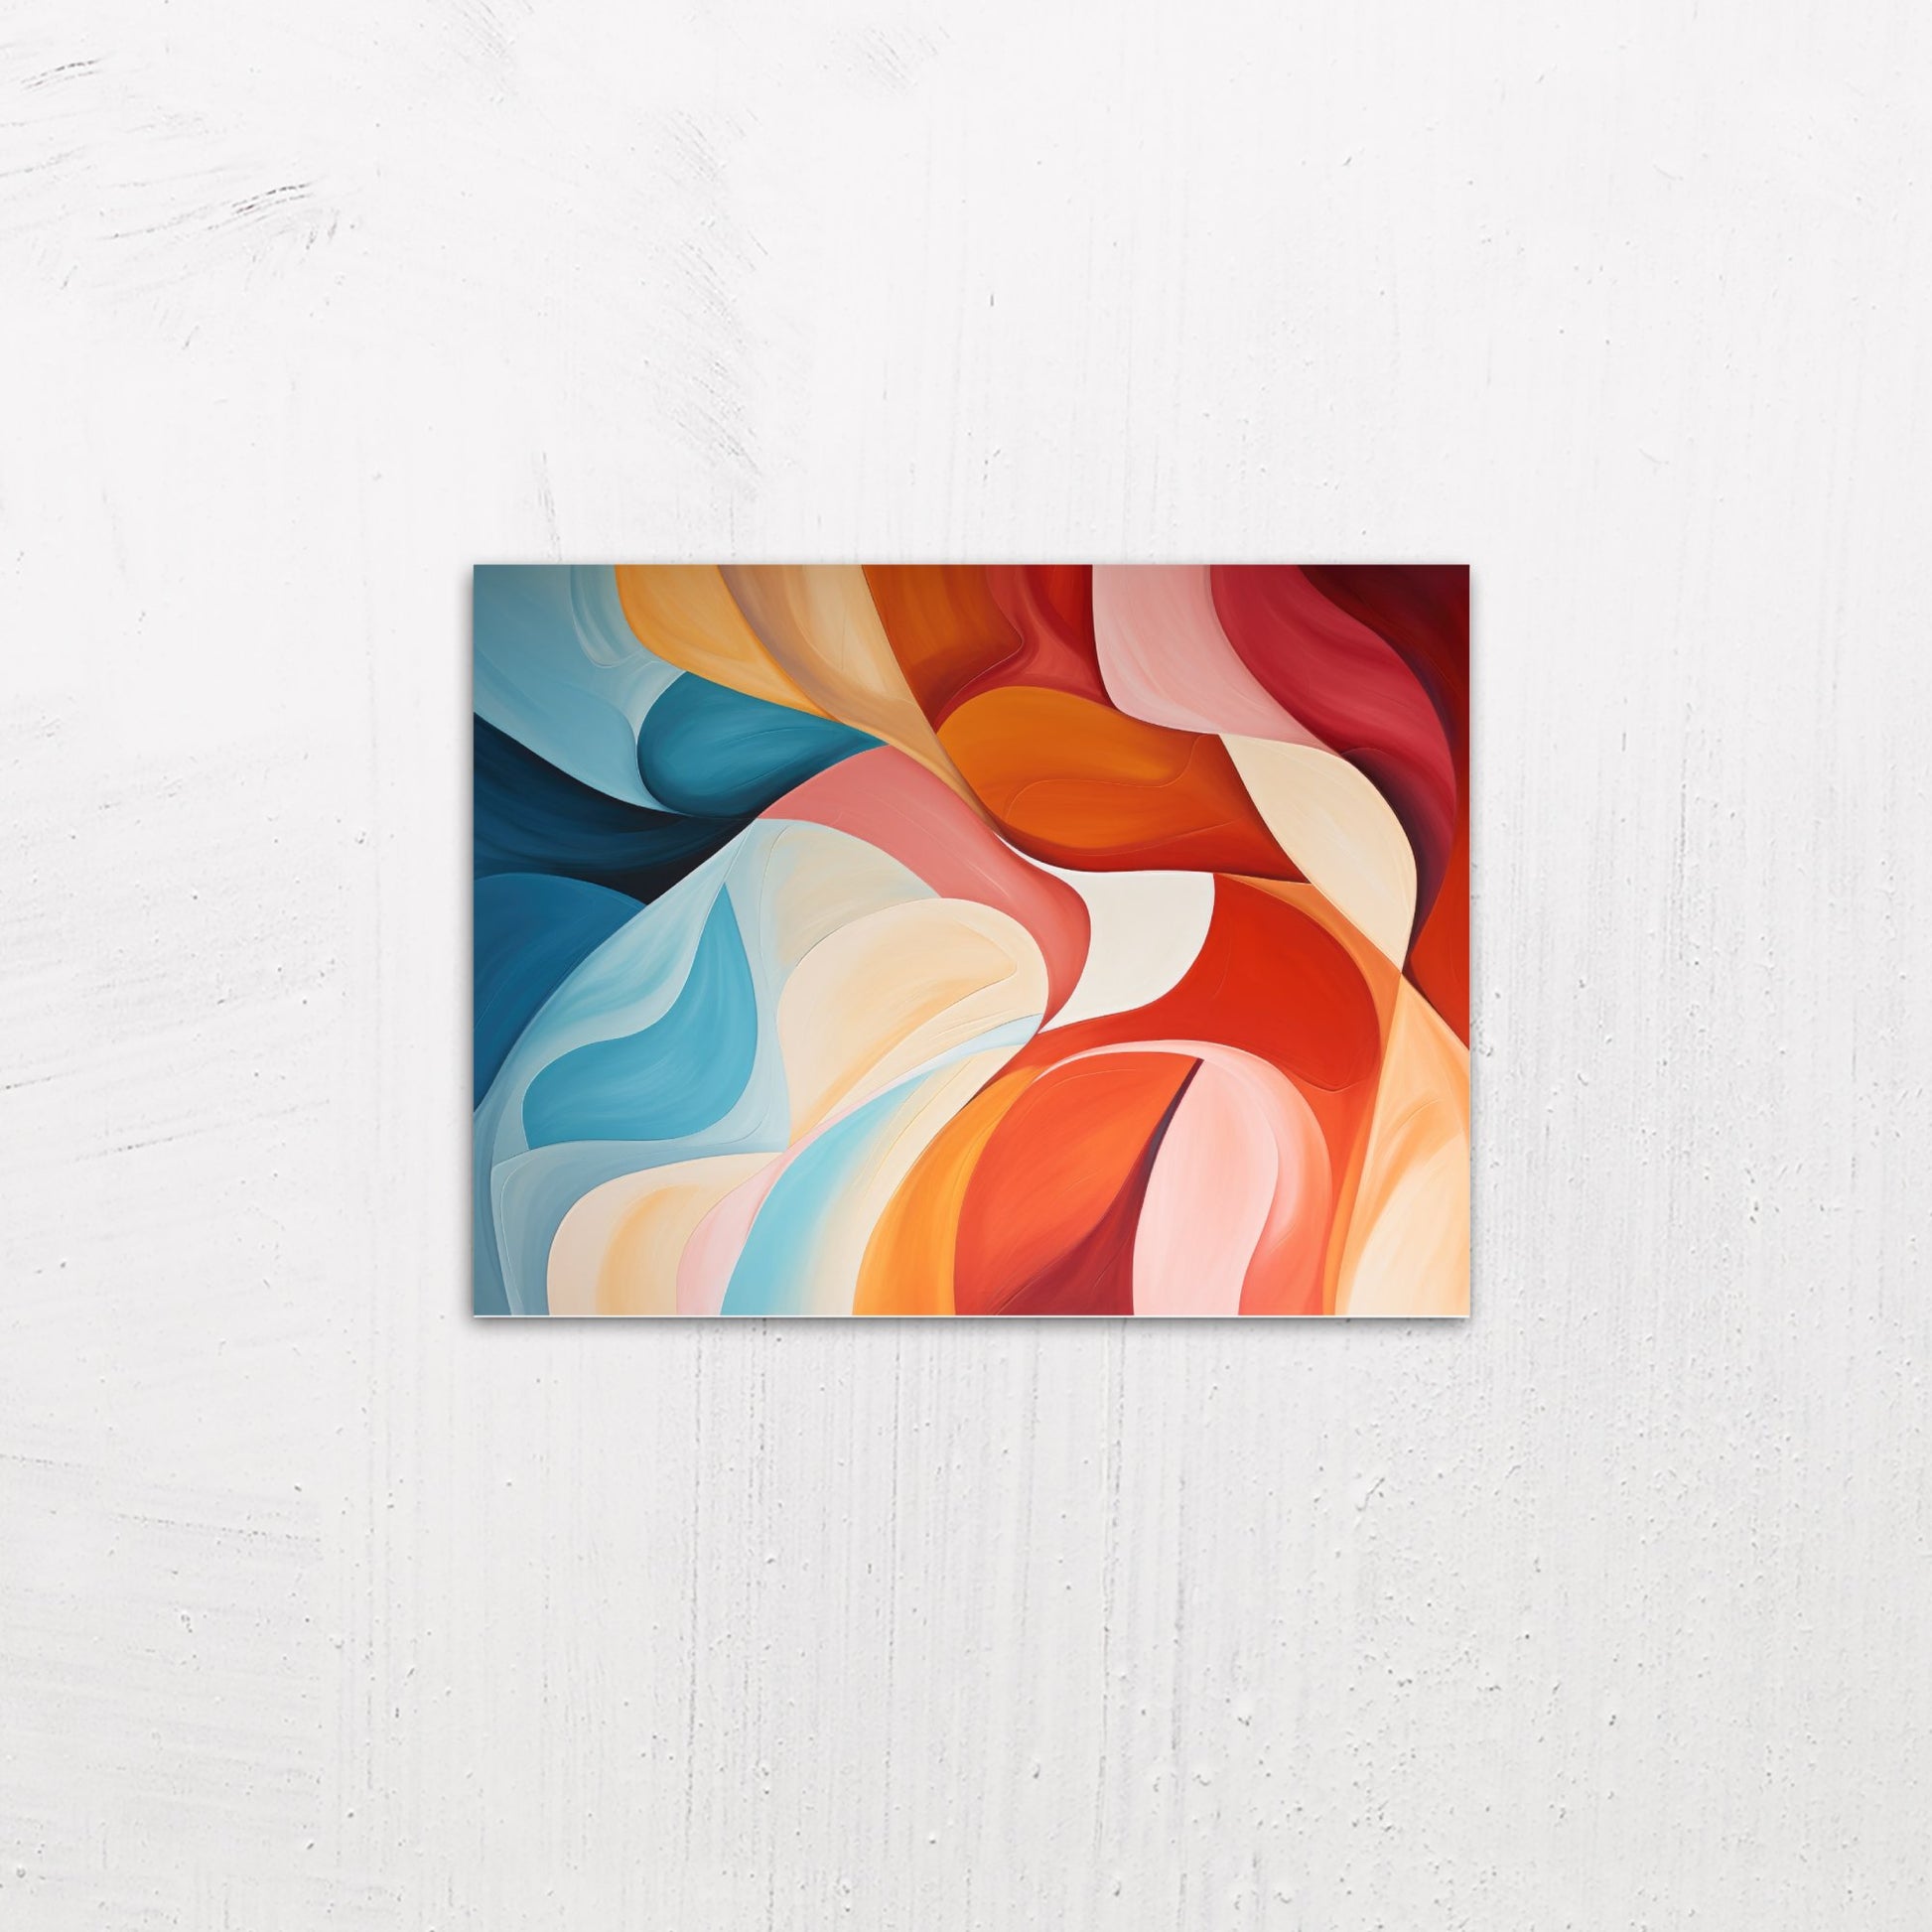 A small size metal art poster display plate with printed design of a Turbulence Abstract Painting